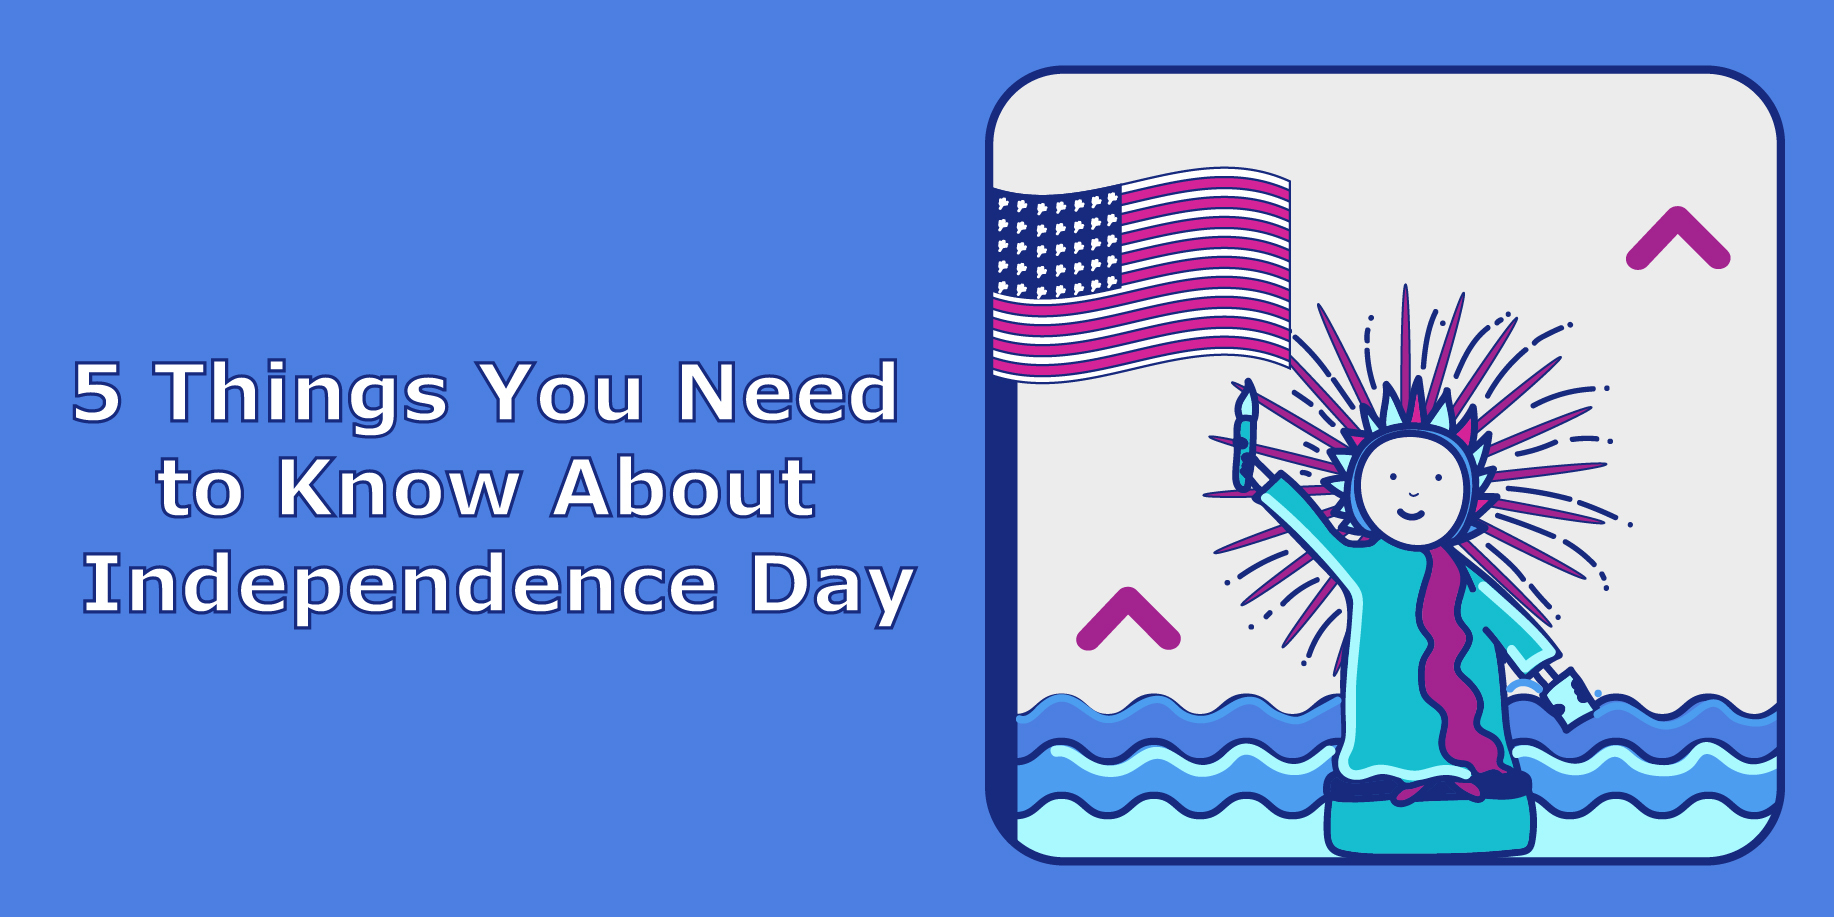 5 Things You Need to Know About Independence Day